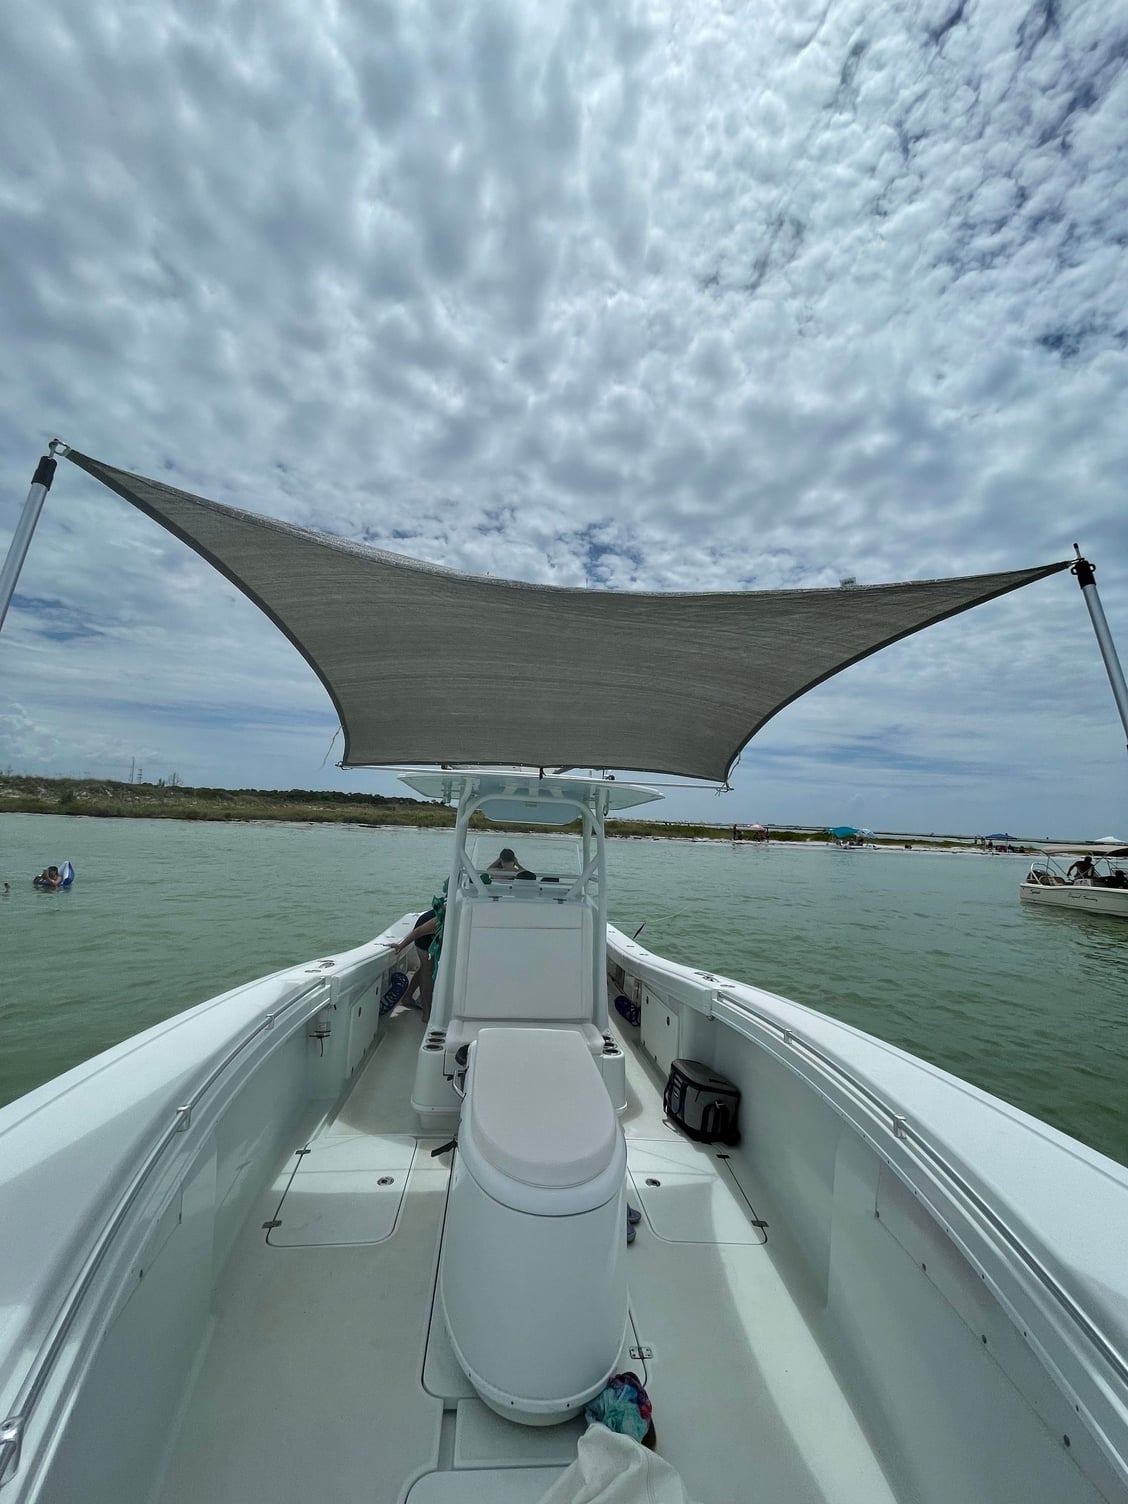 Rod Holder umbrella for shade? - The Hull Truth - Boating and Fishing Forum